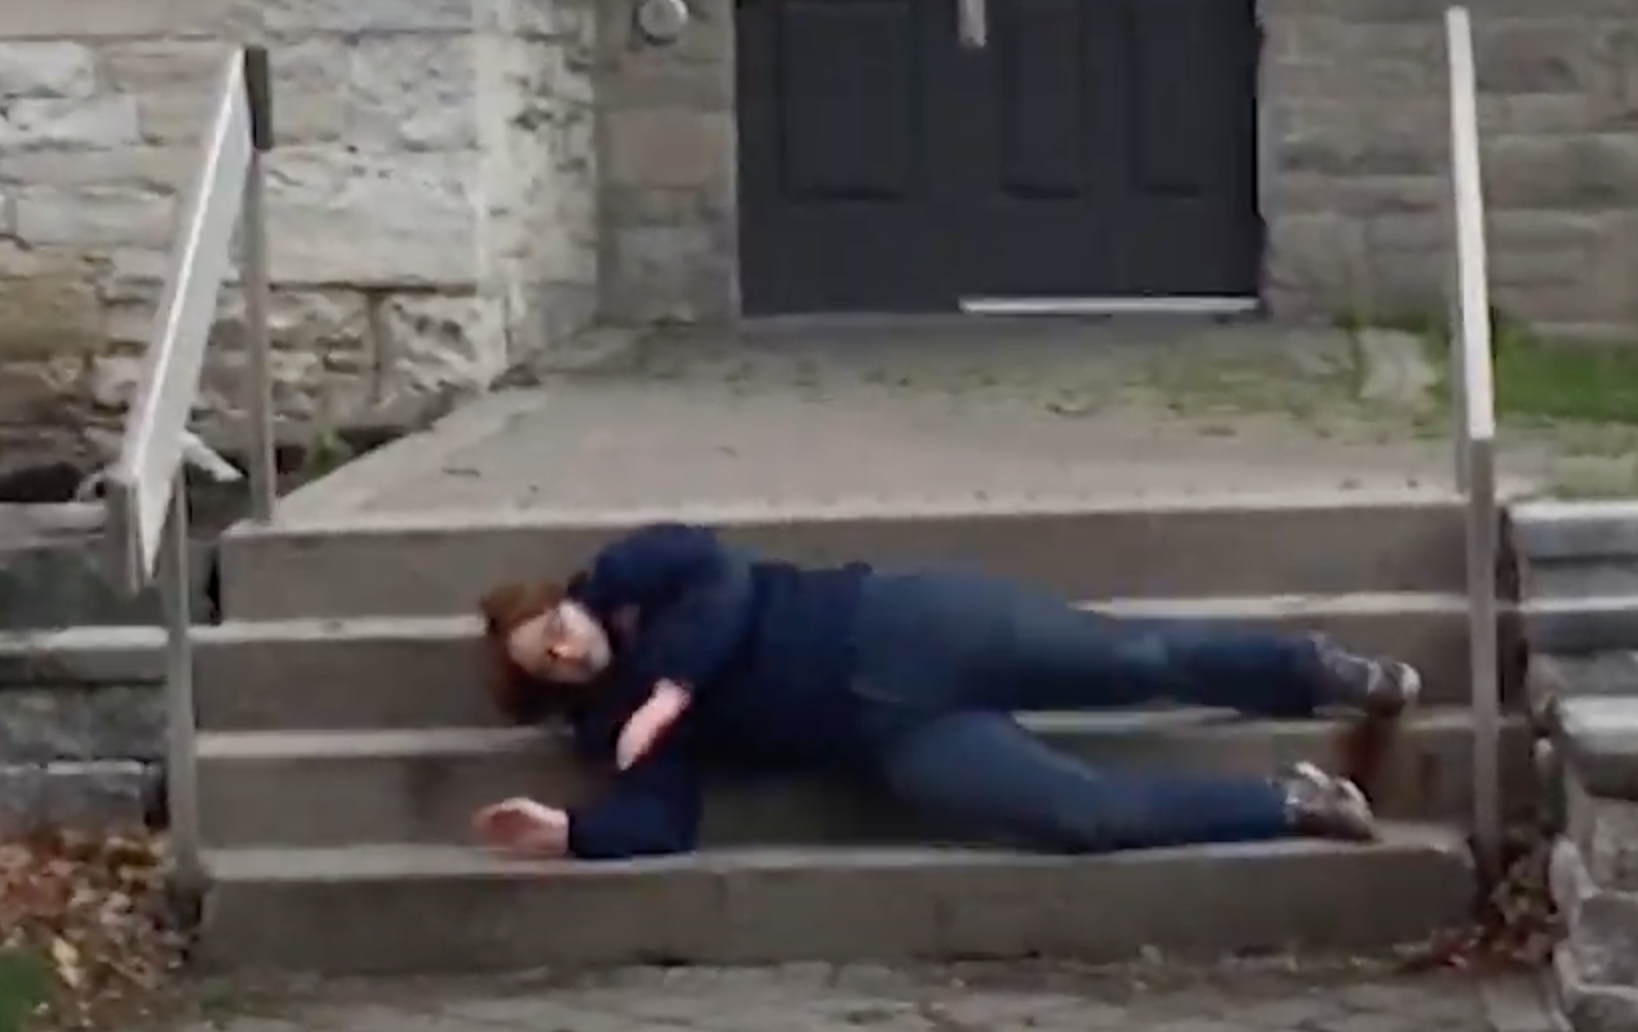 Portia Chapman's Performance Art Video: "Rolling on Campus: An Odyssey of Courage"